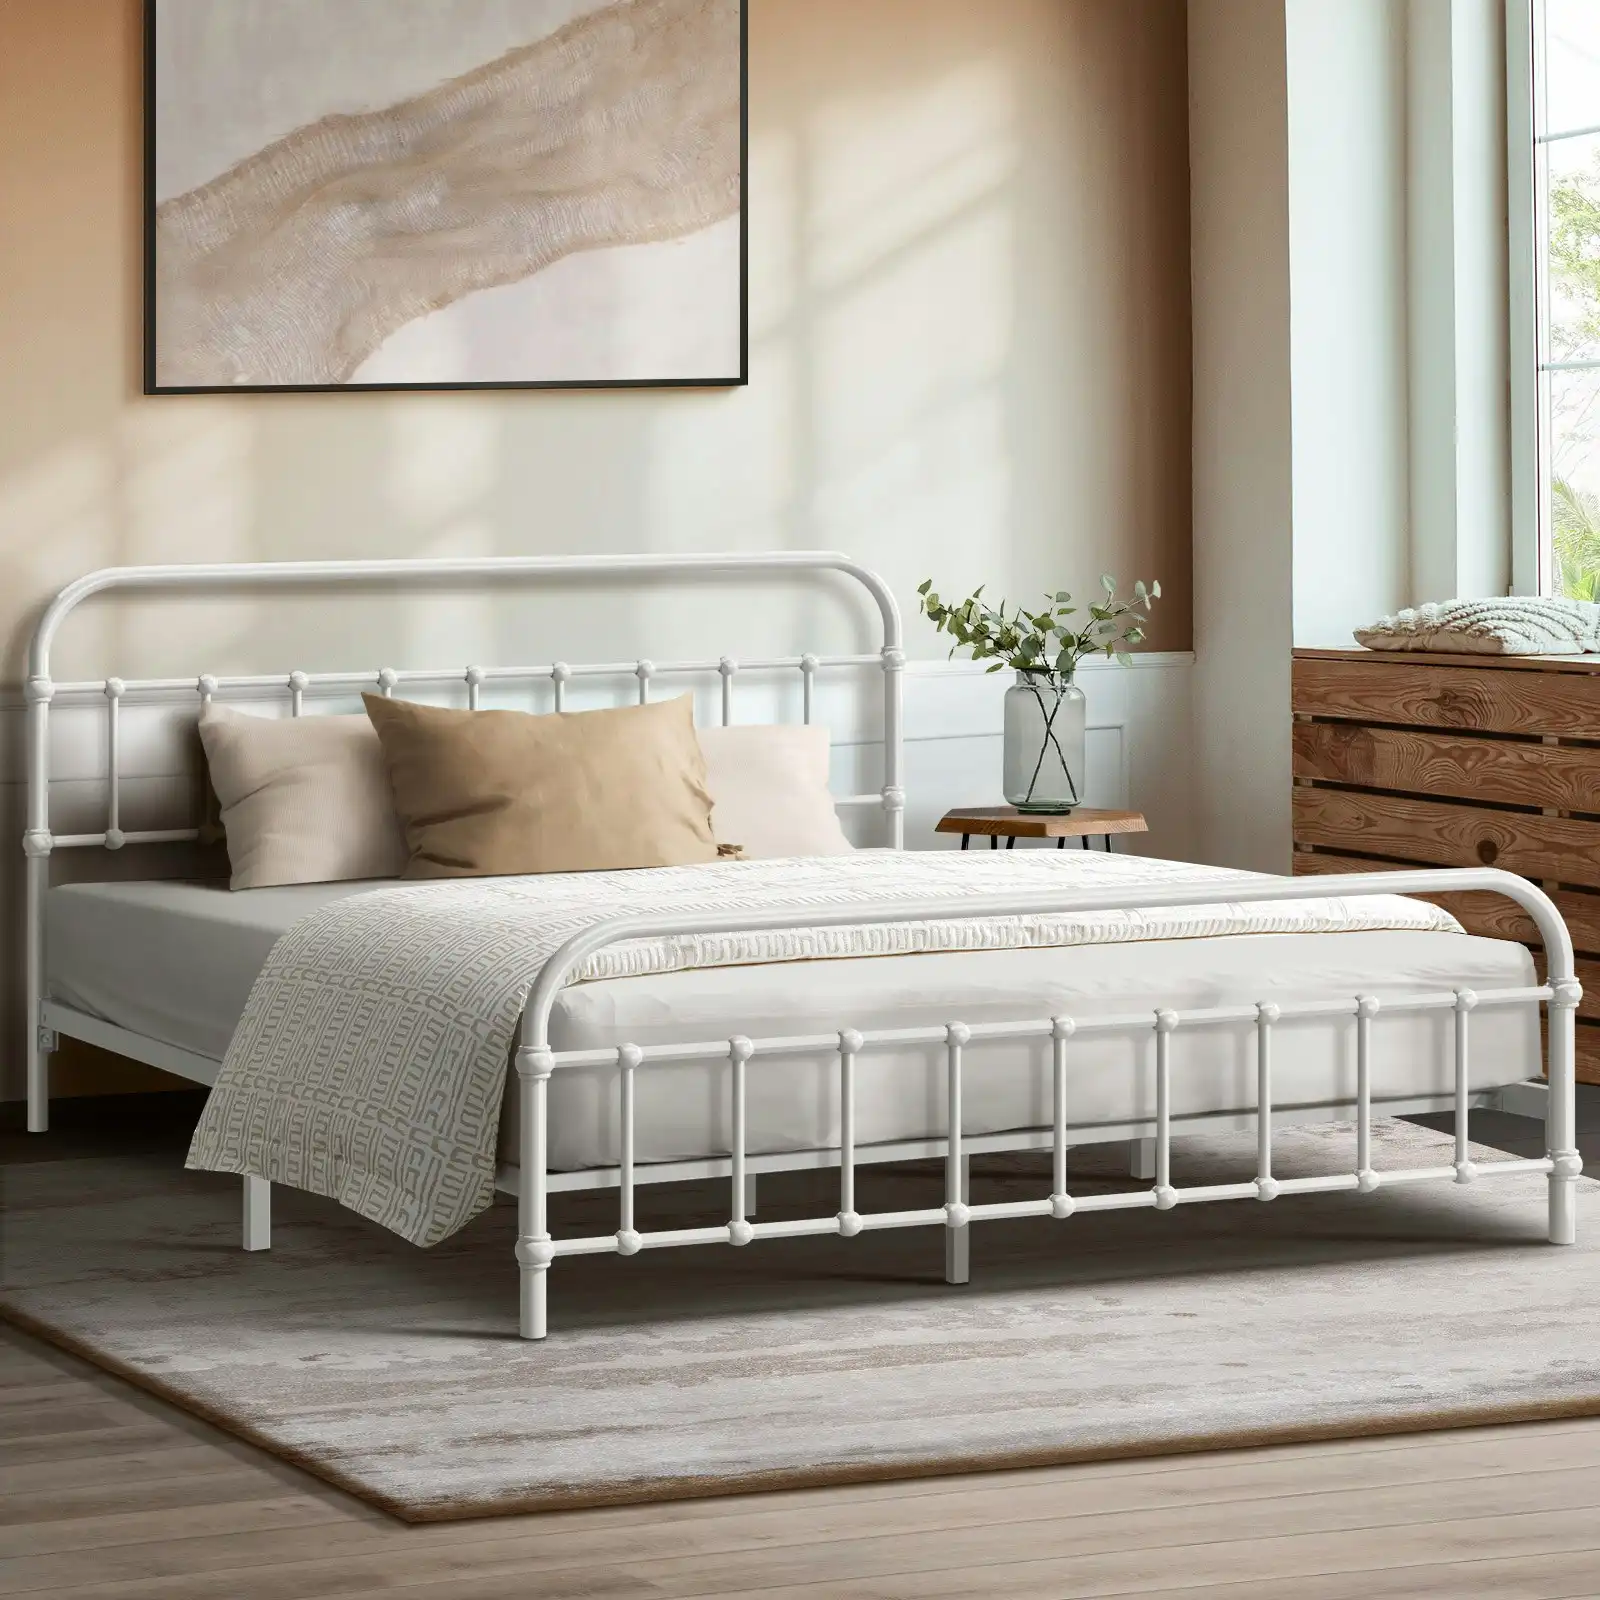 Oikiture Bed Frame Metal Bed Base Queen Size Bed Platform White